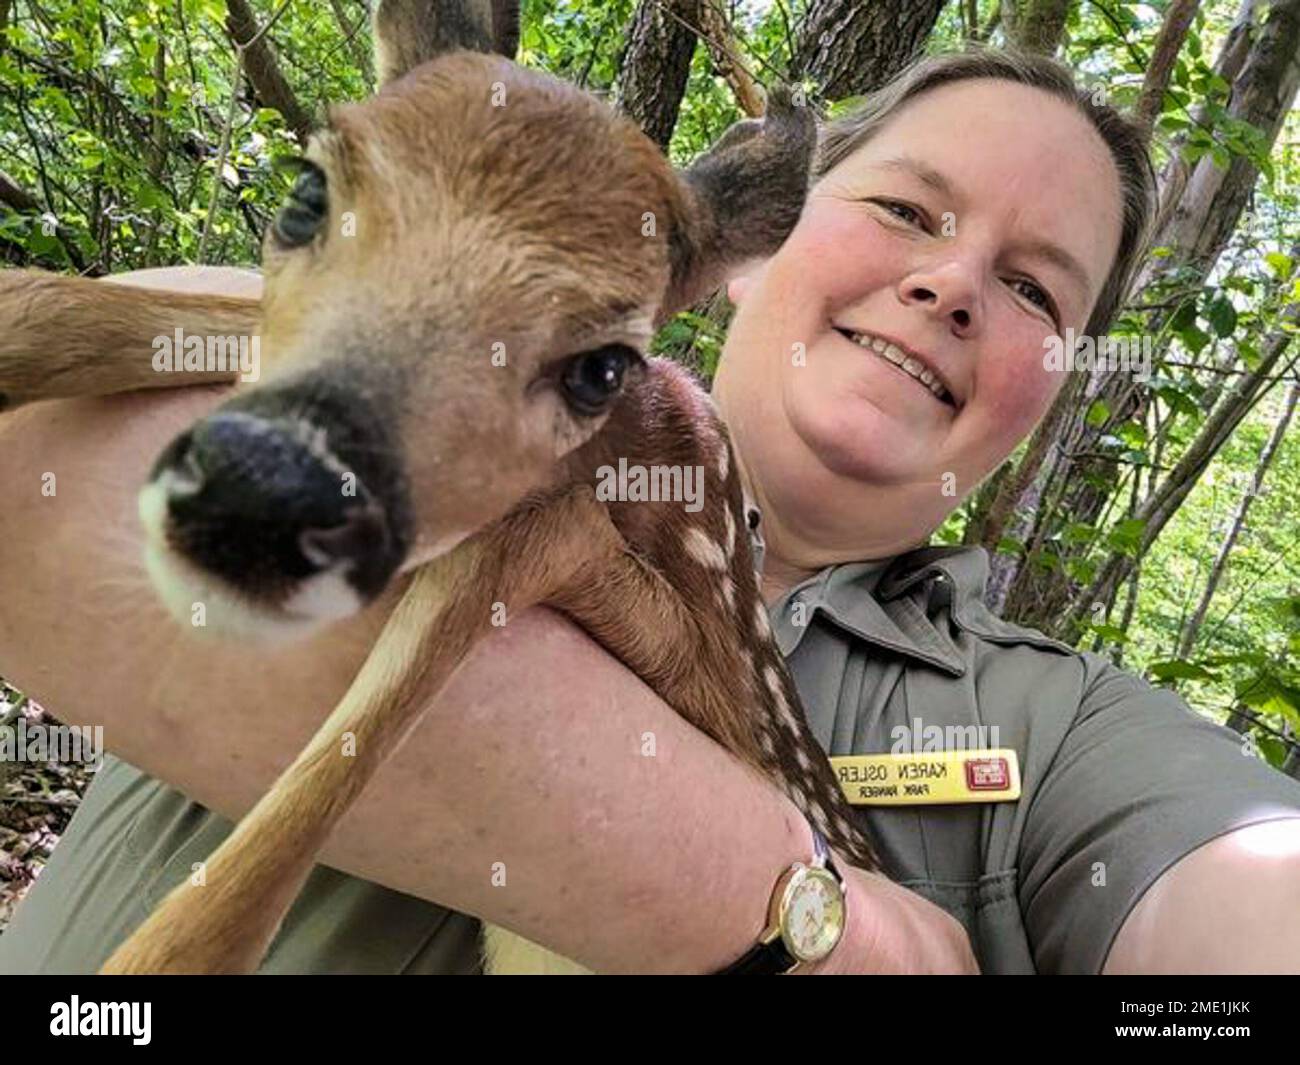 Karen Osler, a park ranger with U.S. Army Corps of Engineers Pittsburgh District, helps a fawn cross the road after watching it fall down and struggling to get up at the Youghiogheny River Lake in Confluence, Pennsylvania. While on patrol, Osler yielded as a doe crossed the road in front of her. The doe was being followed by her new determined yet uncoordinated fawn. As she was crossing the roadway, the fawn fell down in the middle of the road. Mom was frantically trying to get her fawn up. Osler pulled over, picked her up, and carried her away from the road and into the safety of the forest. Stock Photo